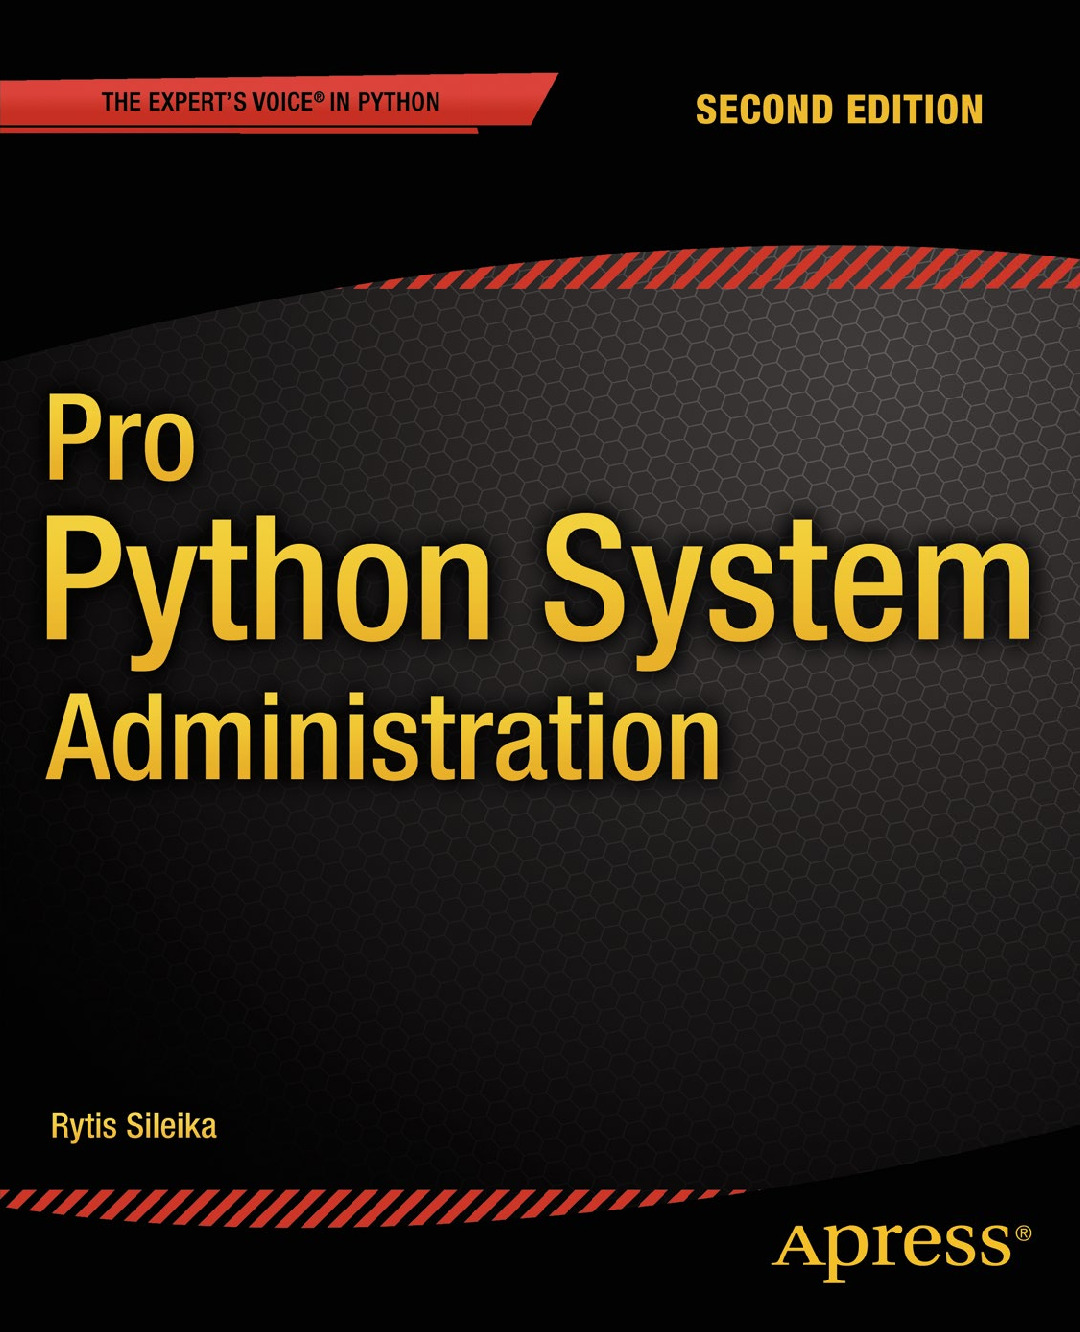 Pro Python System Administration – Second Edition